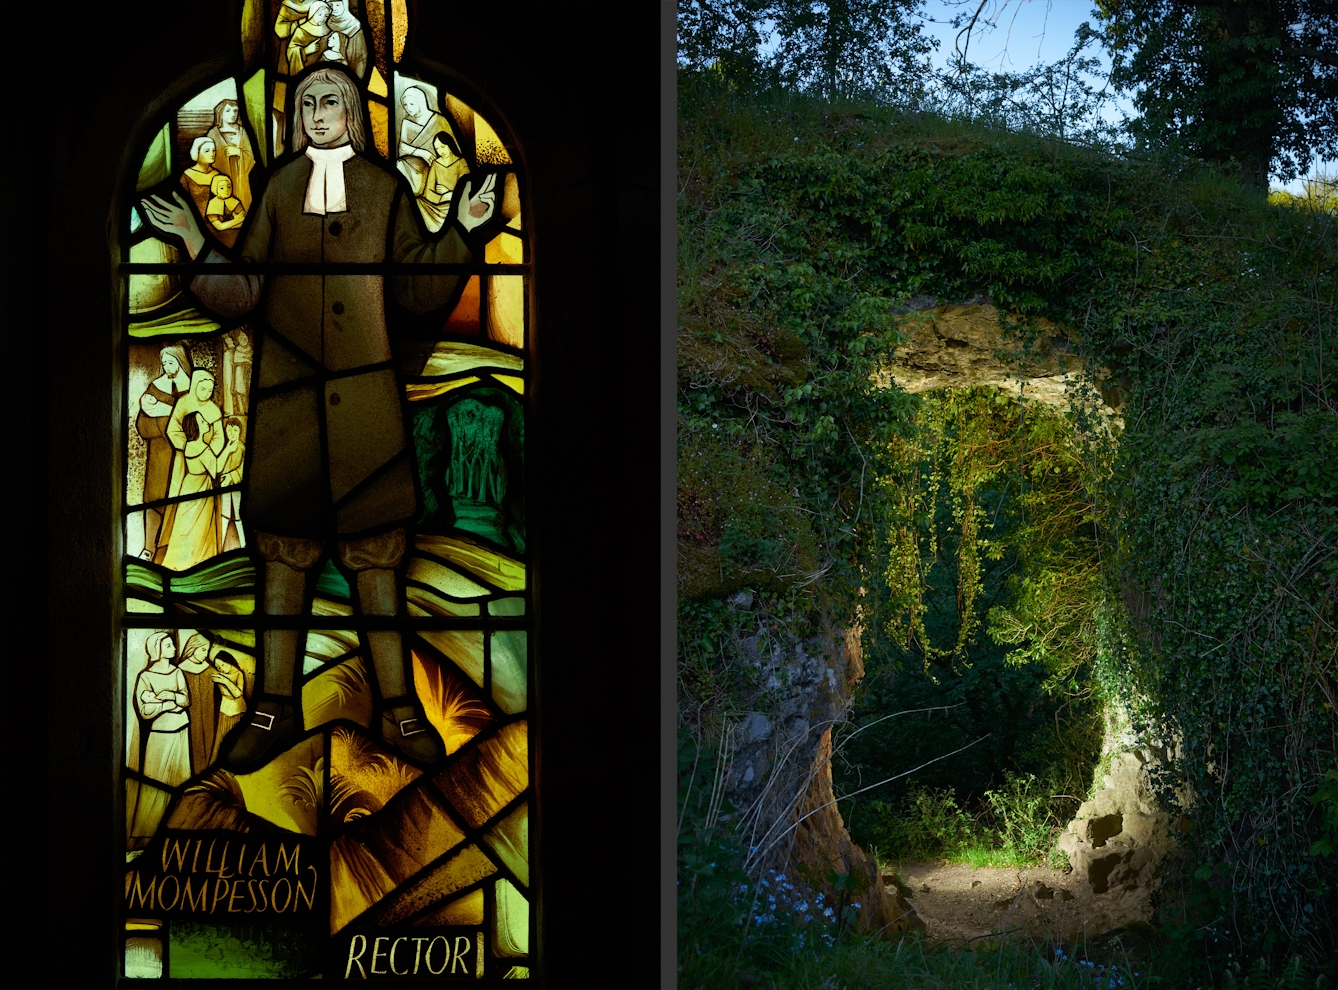 Photographic diptych showing on the left a modern stained glass windows in St Lawrence's Church in Eyam depicting scenes from the plague of 1665/6. On the right is a photograph of a natural rock arch covered in foliage, spotlit from within.